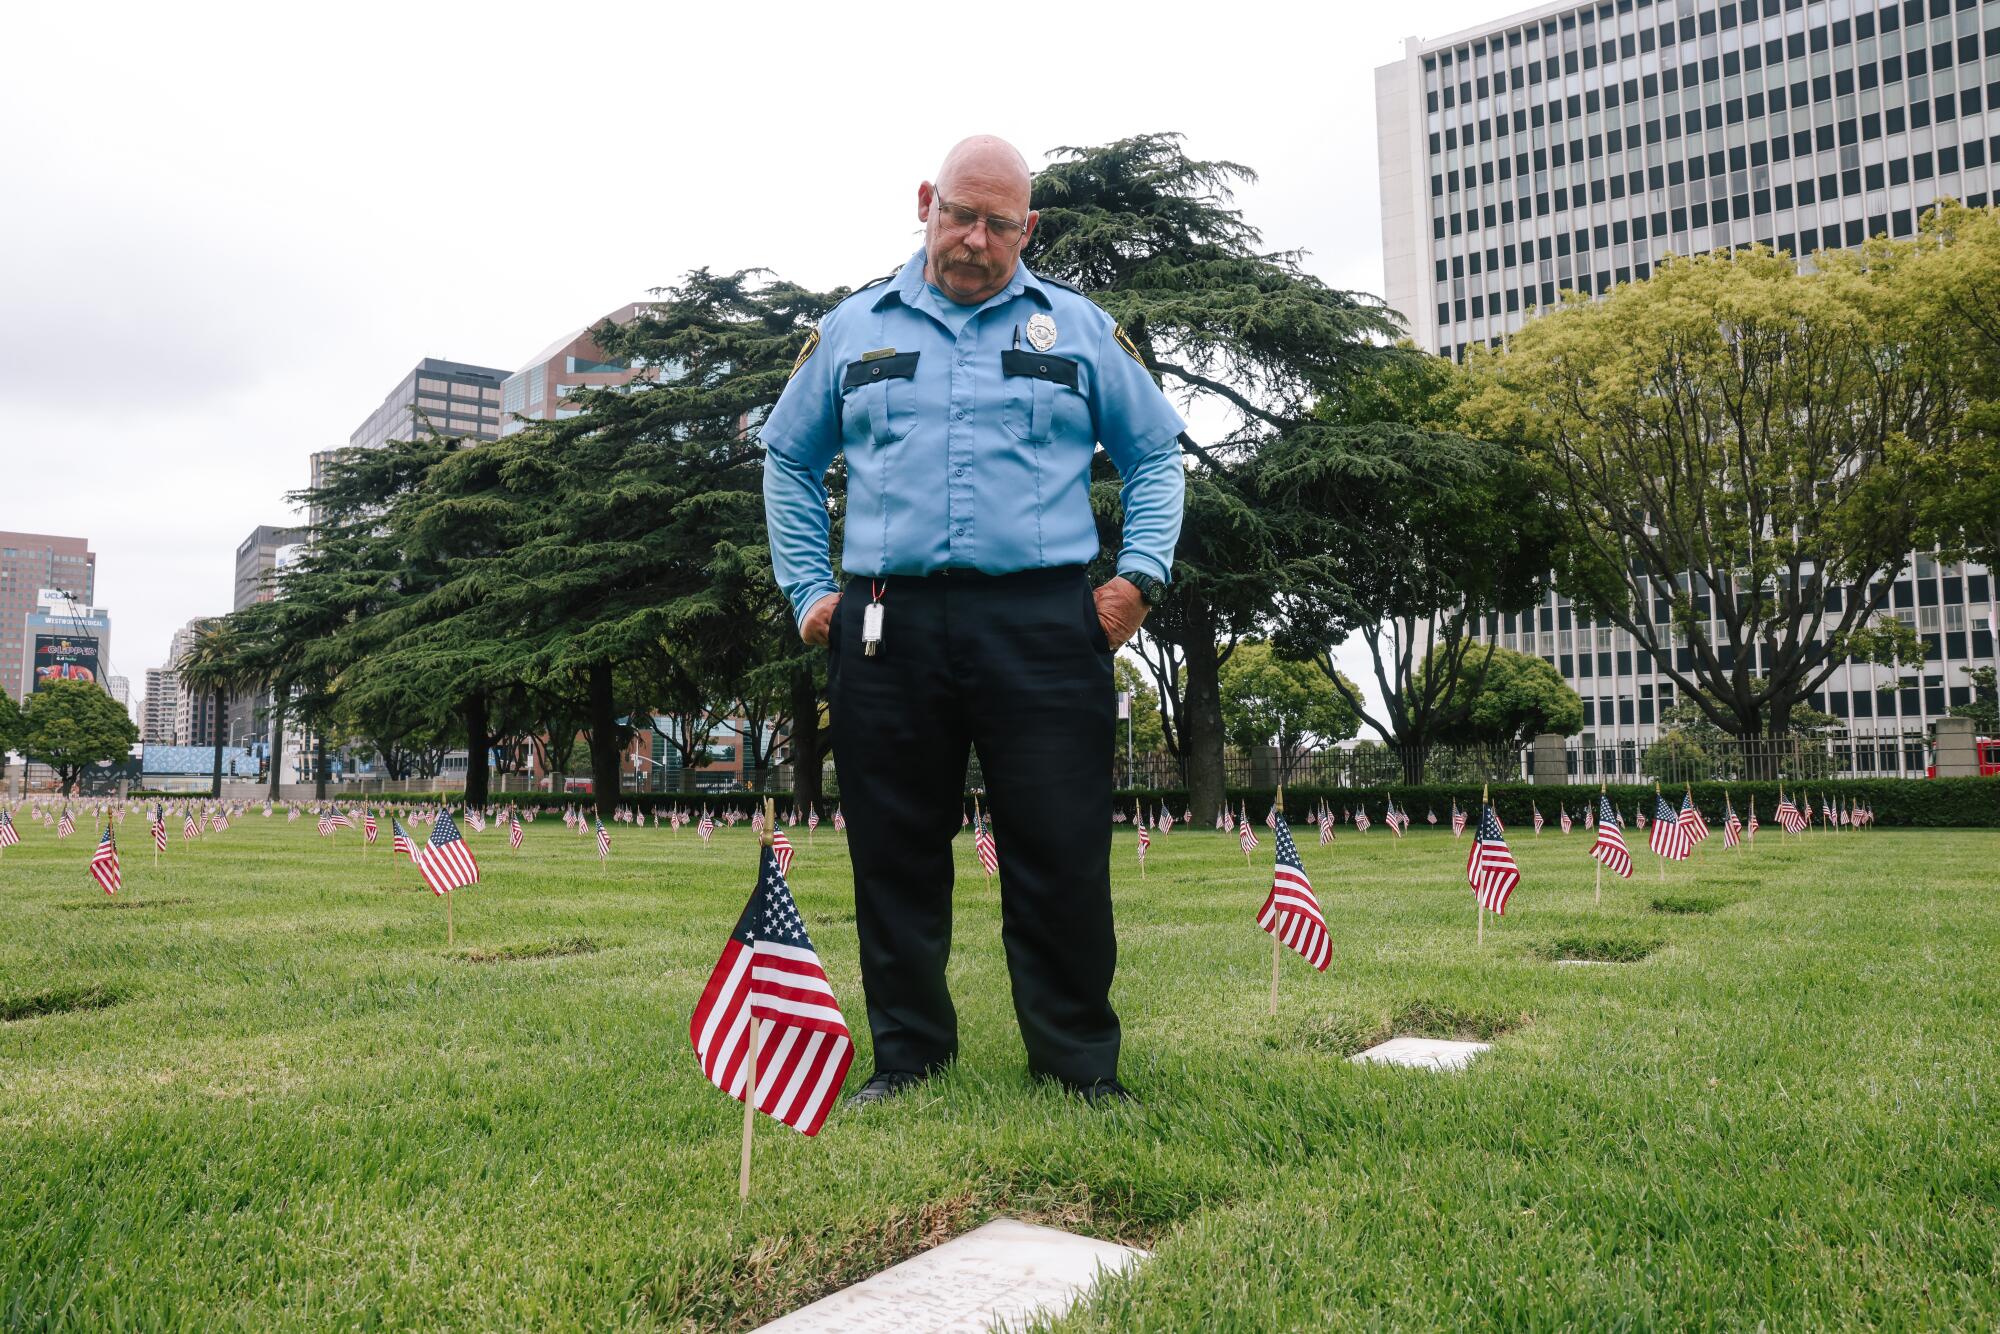 Scott Sargent, working security, looks toward the grave of his relative, Lewis L. Owens.